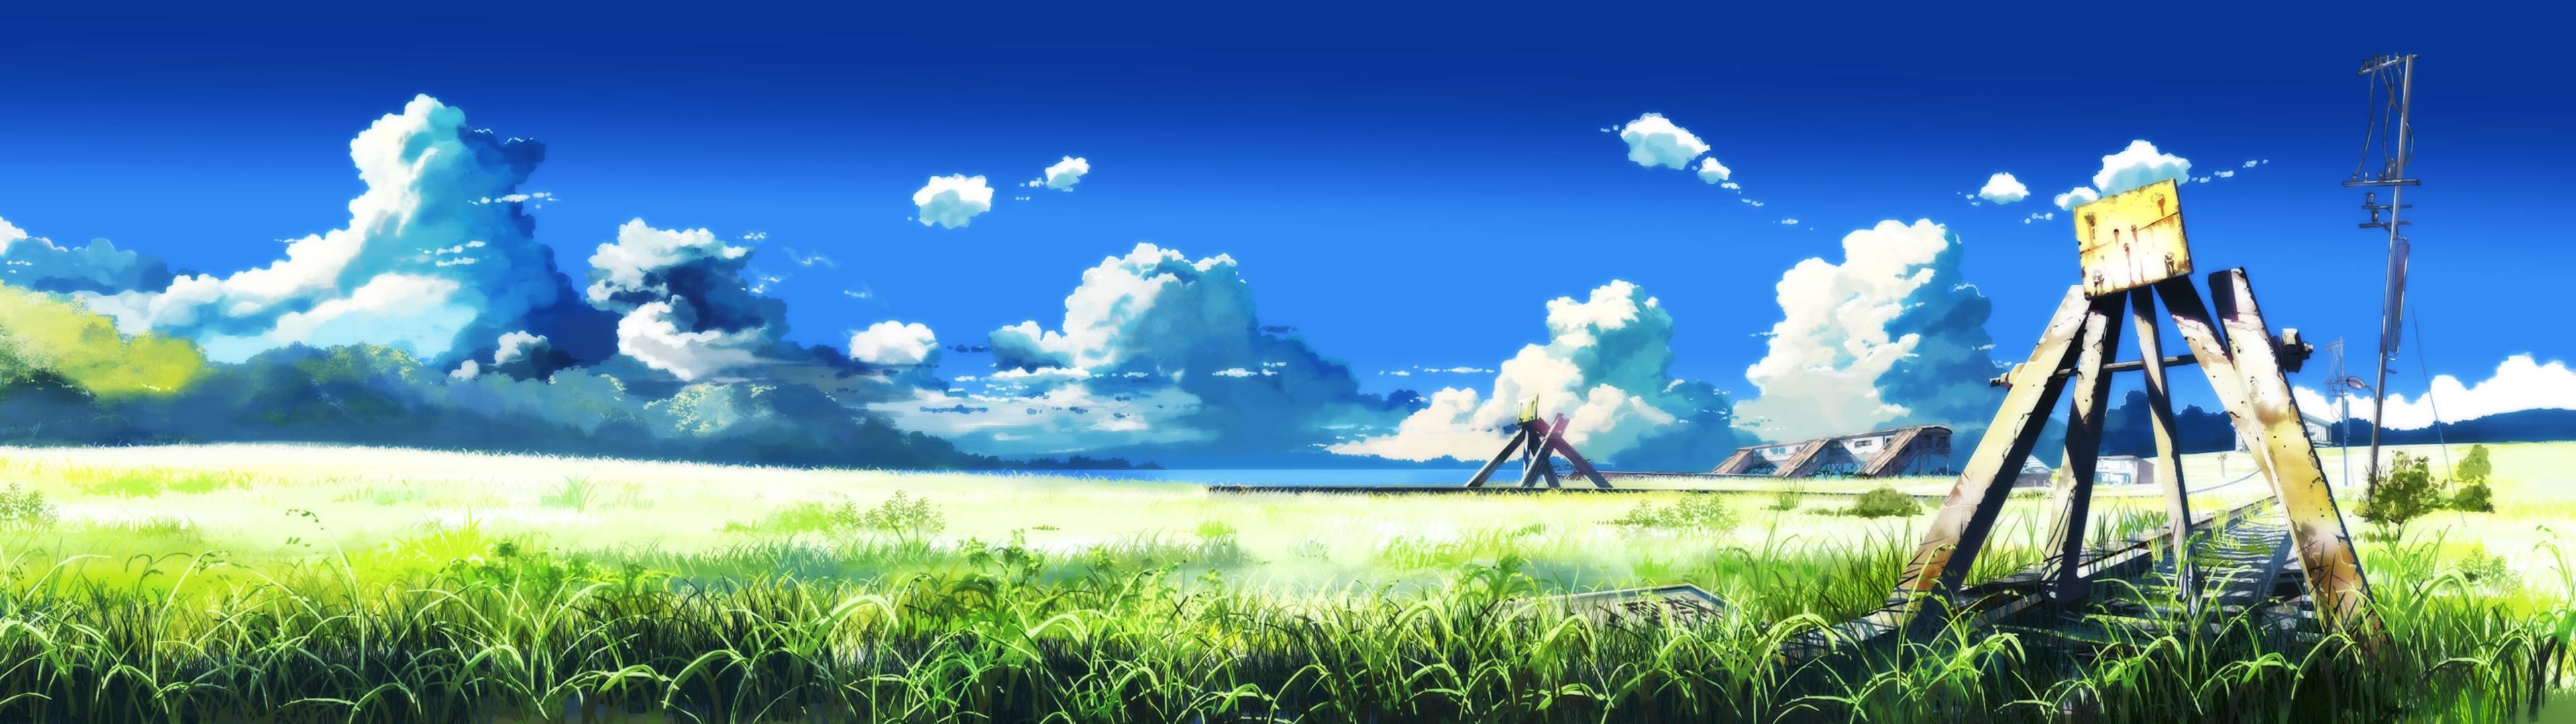 3840x1080 wallpaper.wiki-Best-Anime-Dual-Monitor-HD-Pictures-